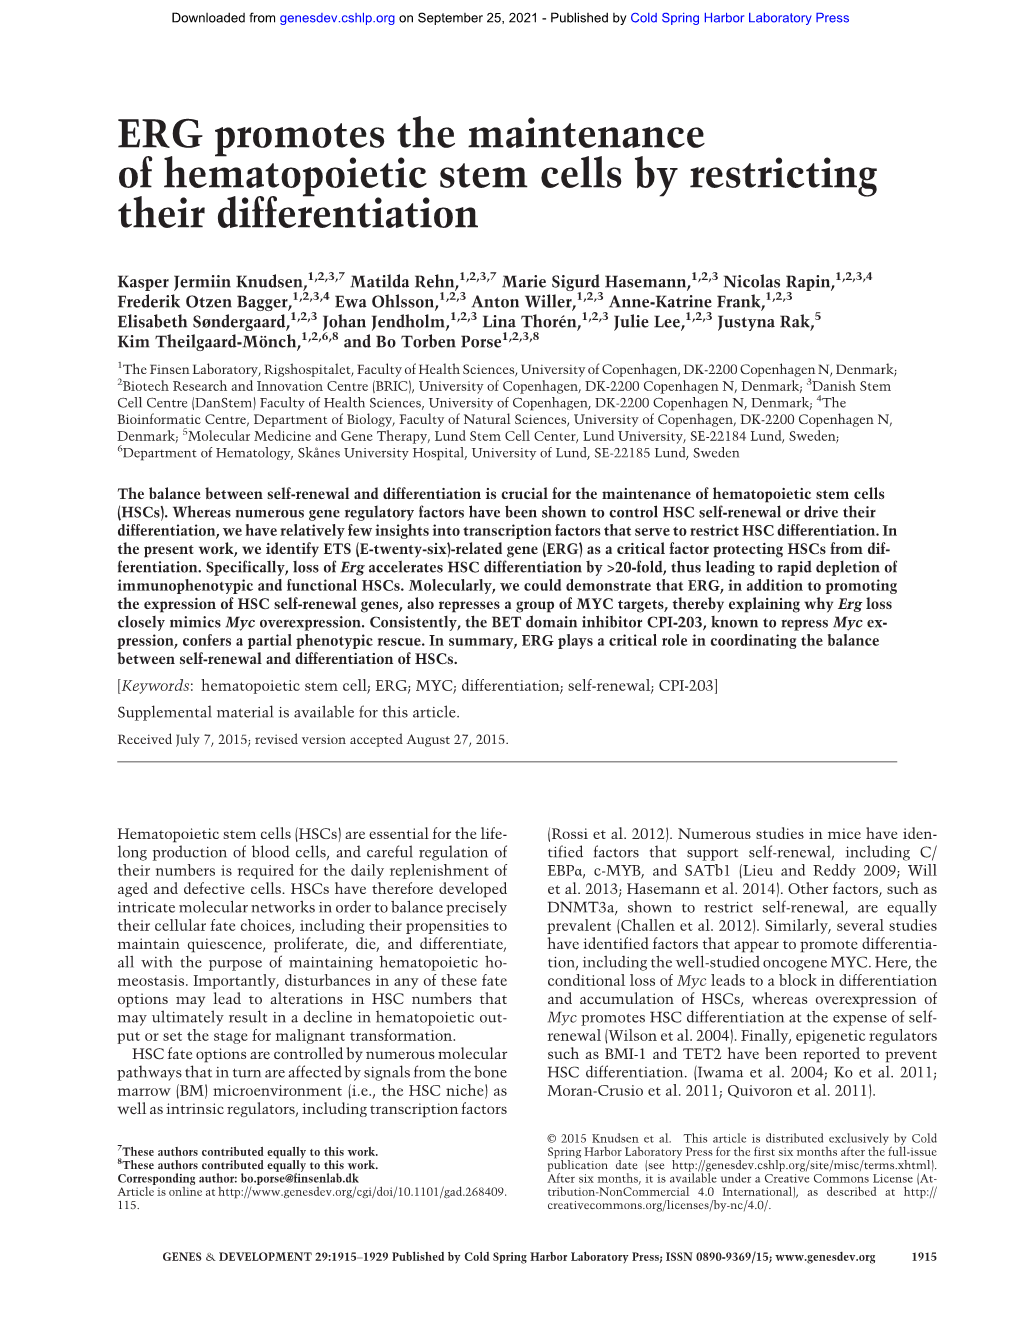 ERG Promotes the Maintenance of Hematopoietic Stem Cells by Restricting Their Differentiation